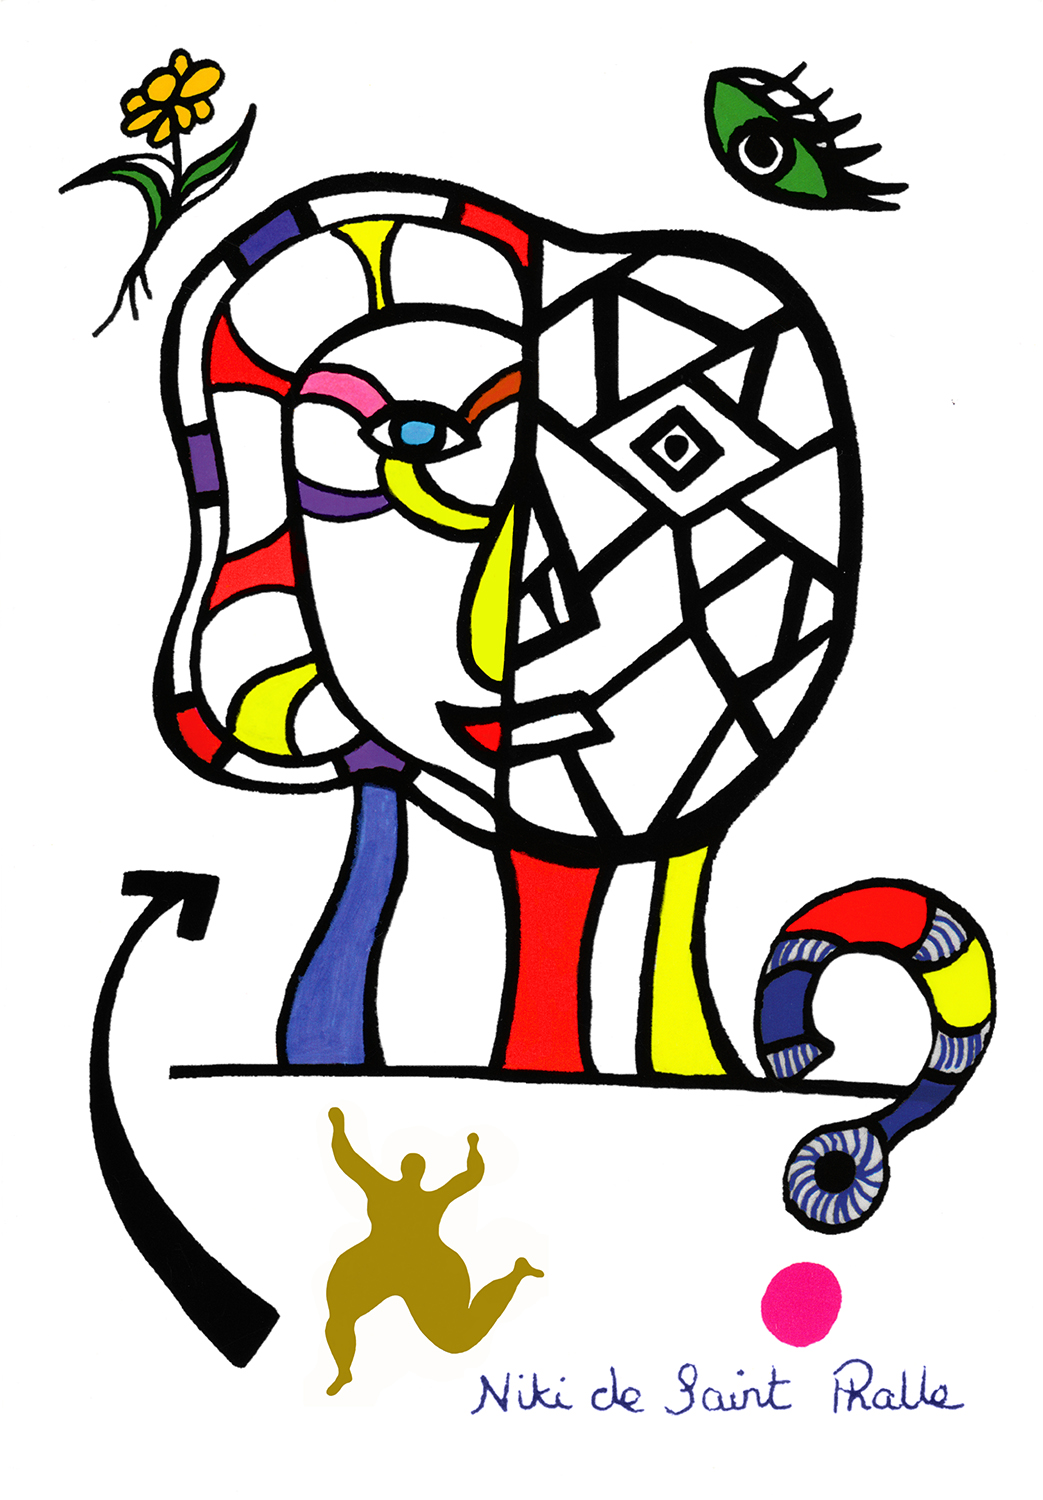 A colorful drawing of the sculpture titled "Coming Together" with a flower, and eye, an arrow, a dancing Nana and a question mark surrounding it. The signature of the artist is below the design. This is the invitation to the dedication ceremony of the public sculpture.